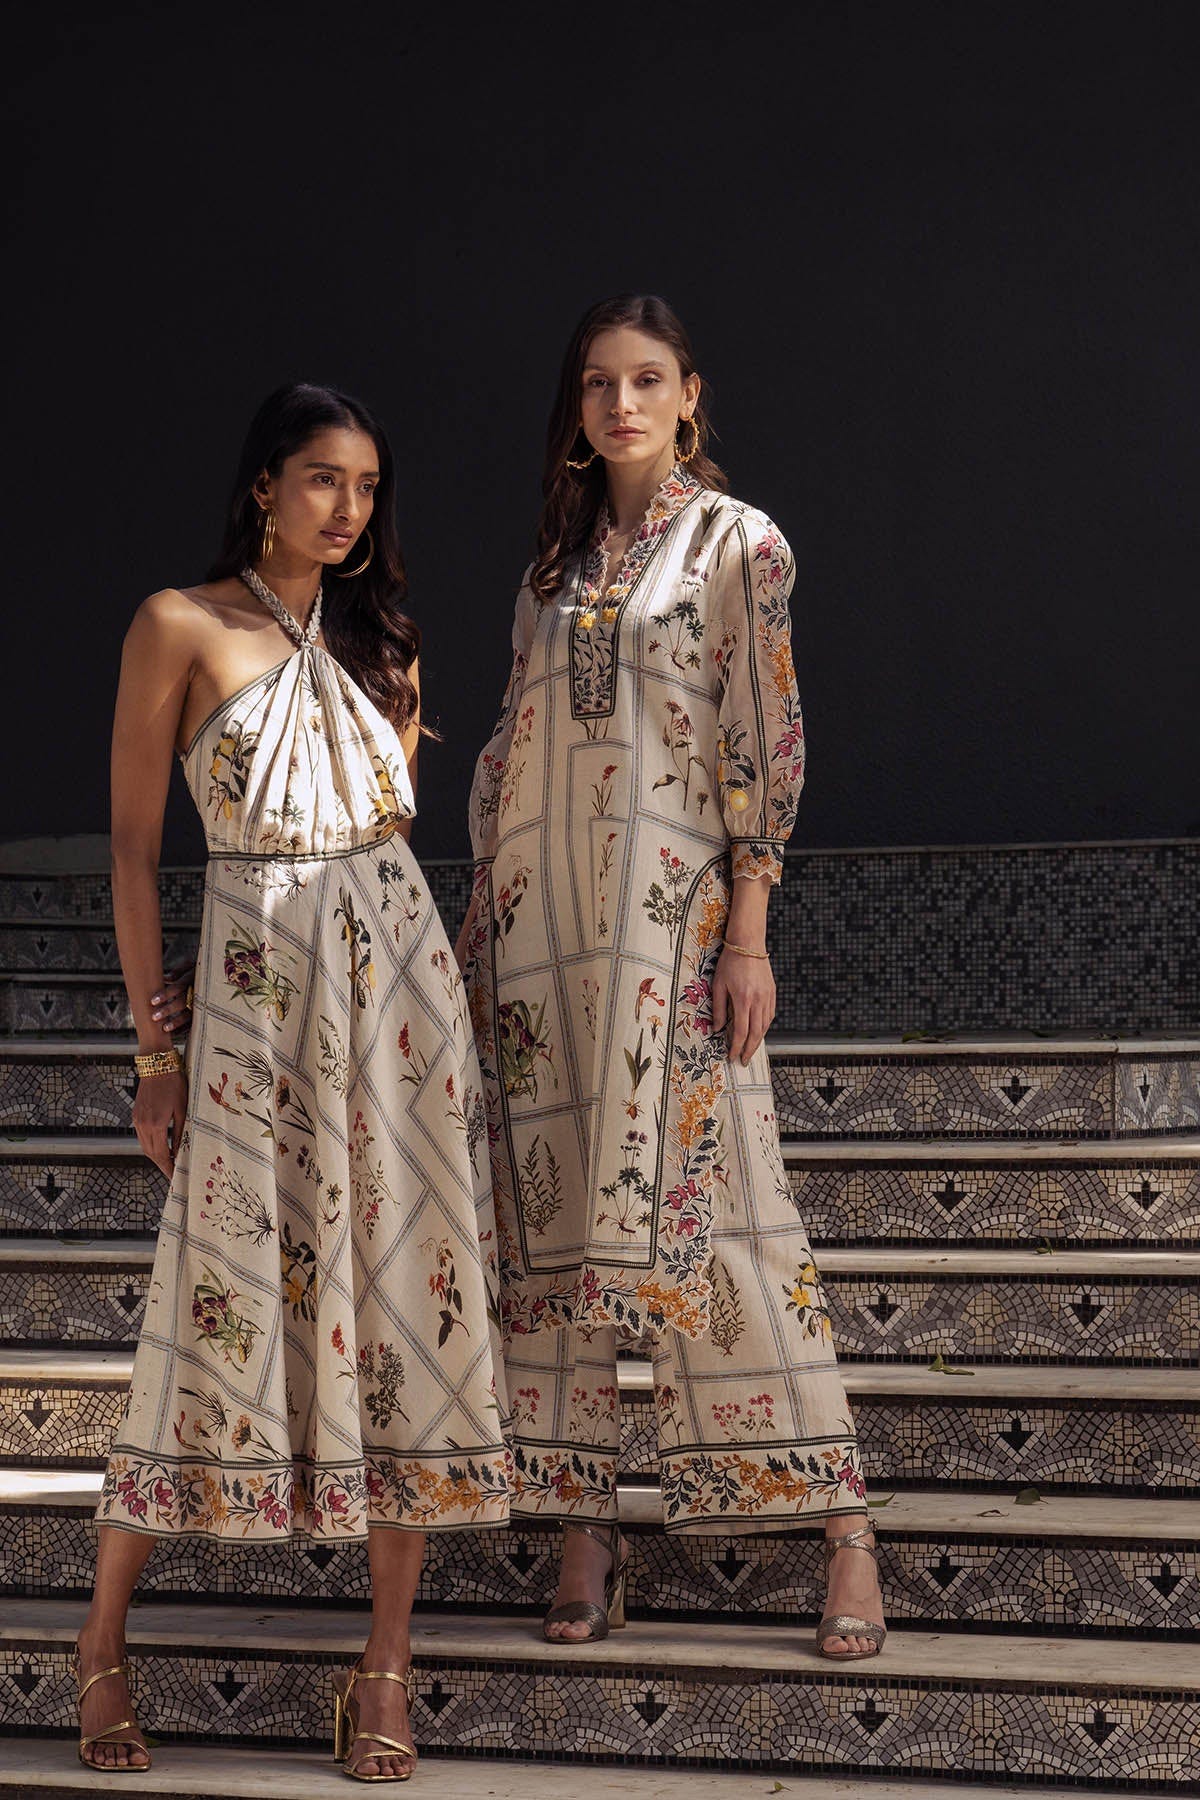 Ranna Gill's Fusion Collection: Bridging Cultures with Unique Dress Designs, by Meeragoyal